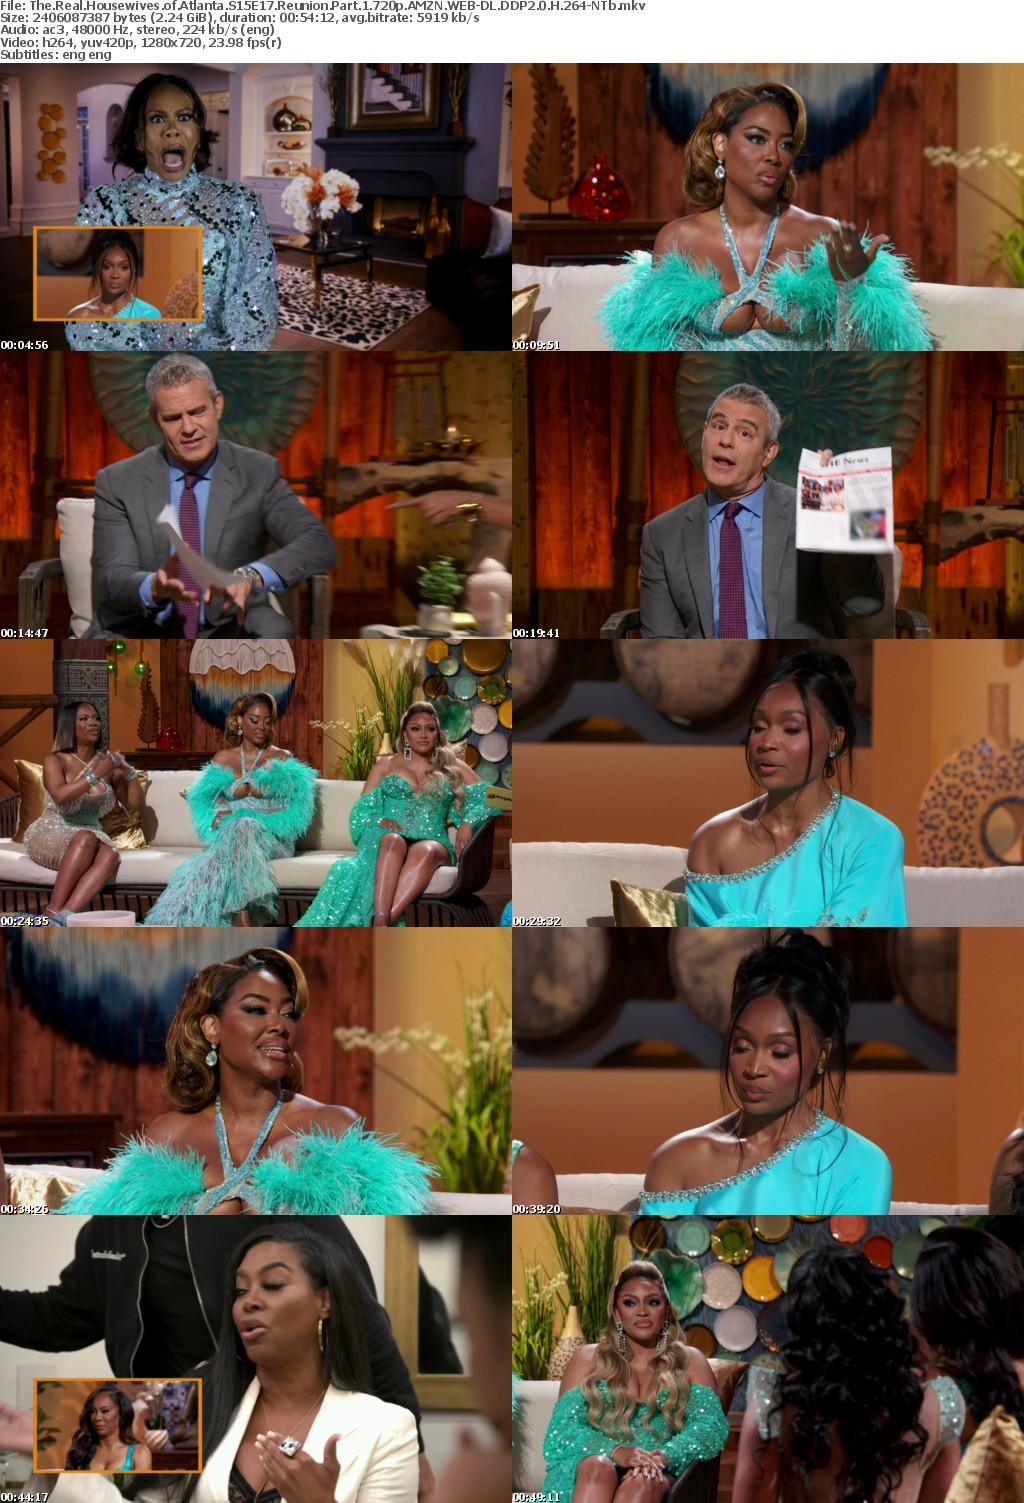 The Real Housewives of Atlanta S15E17 Reunion Part 1 720p AMZN WEB-DL DDP2 0 H 264-NTb